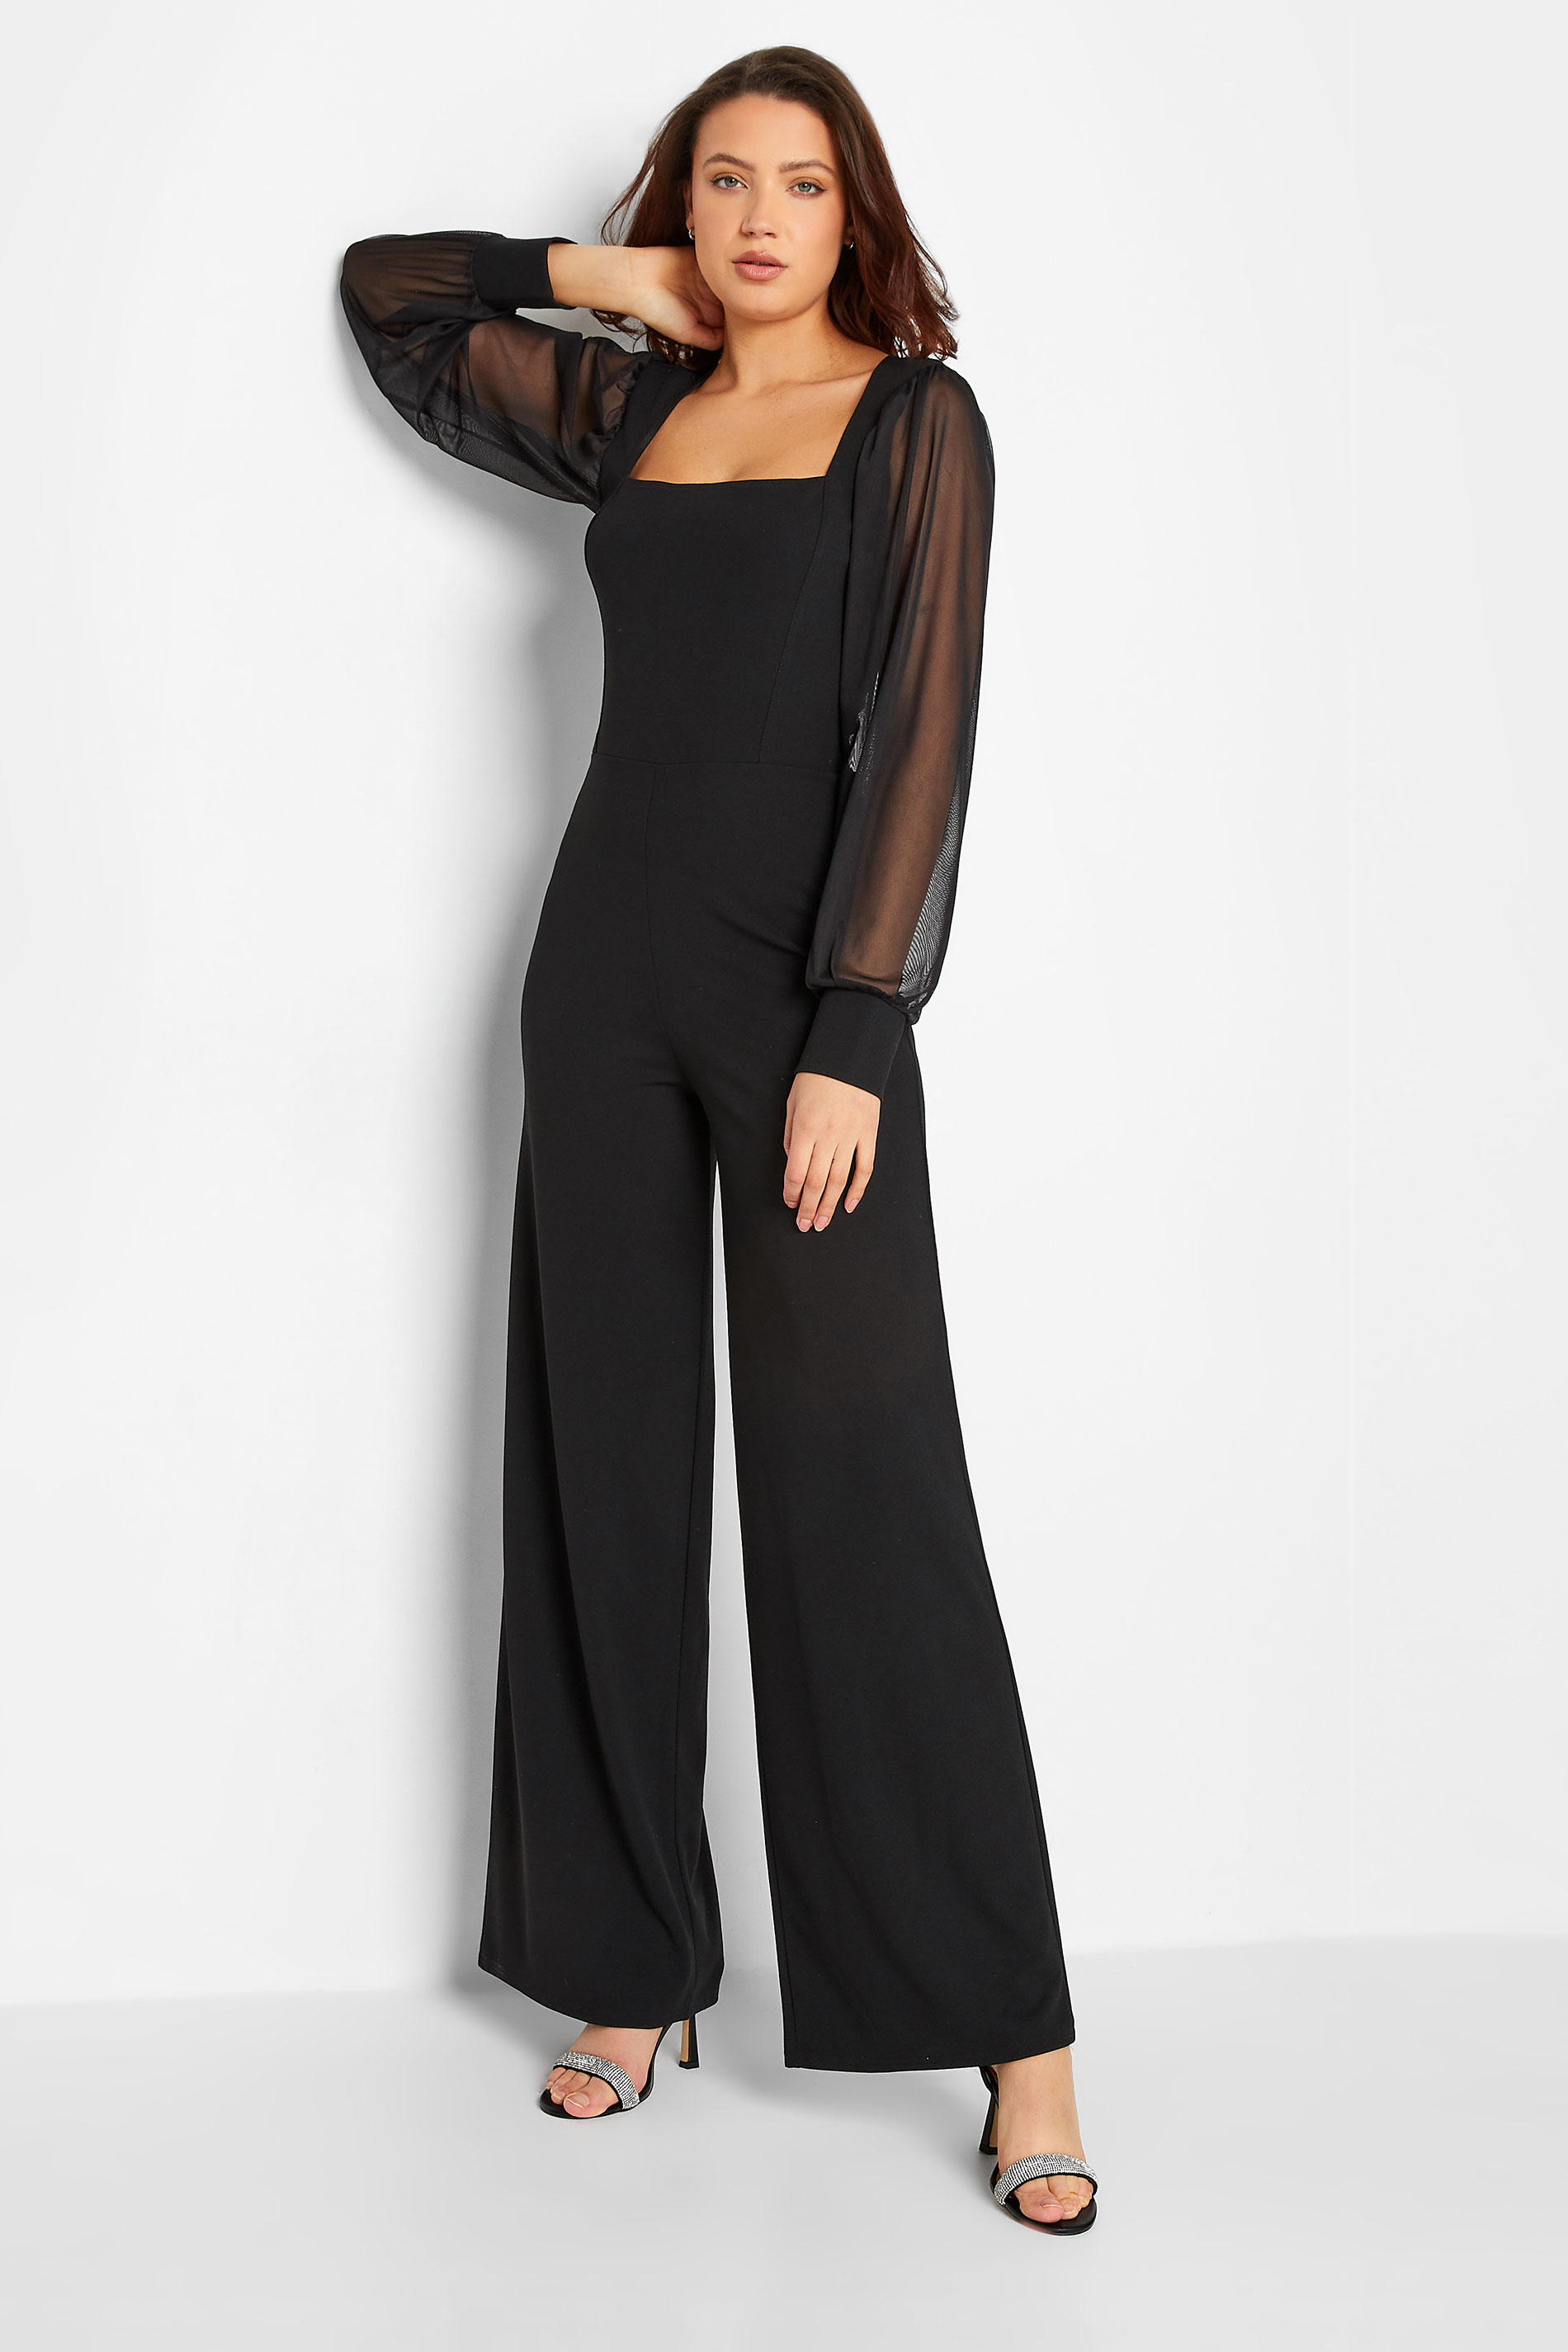 Long tall sally, Playsuits & jumpsuits, Women